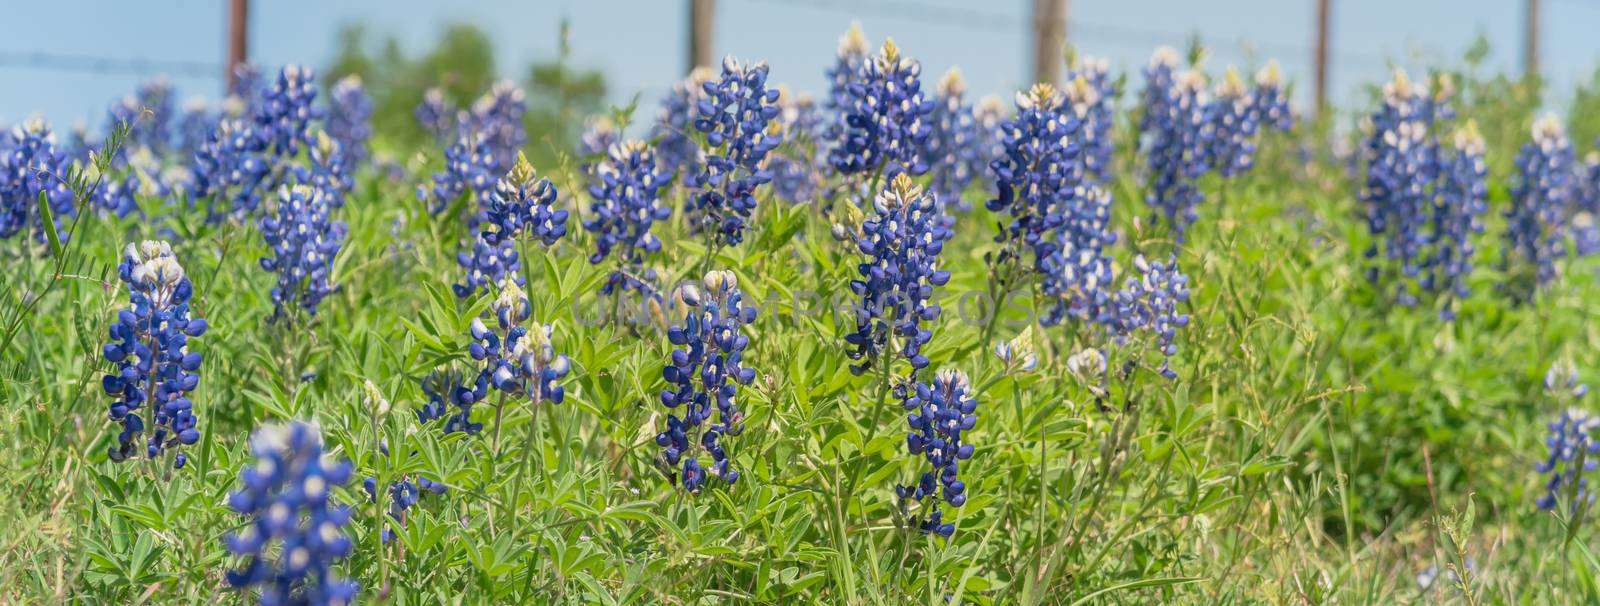 Panorama view close-up selective focus of Bluebonnet wildflower blooming in countryside Bristol, Texas. Colorful state flower of Texas blossom with blurry farm barbed wire fence in background